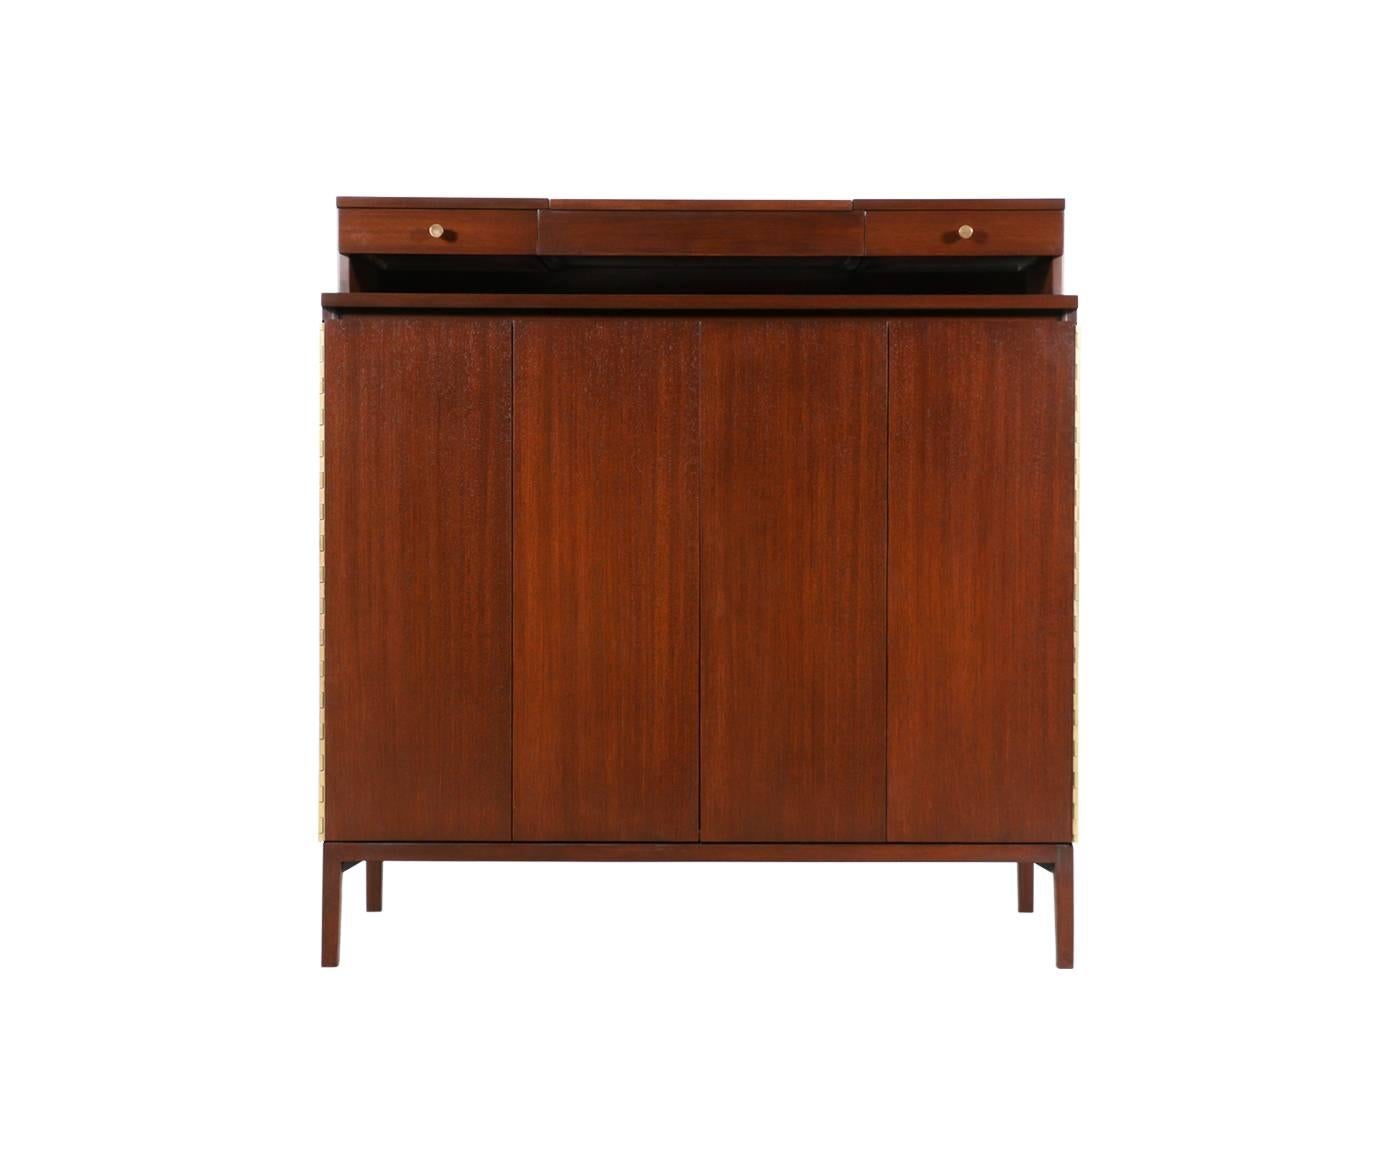 Designer: Paul McCobb.
Manufacturer: Calvin Group “Irwin Collection”.
Period/style: Mid-Century Modern.
Country: United States.
Date: 1950s.

Dimensions: 49.75″ H x 48″ W x 19″ D.
Materials: Mahogany, brass.
Condition: Excellent, newly